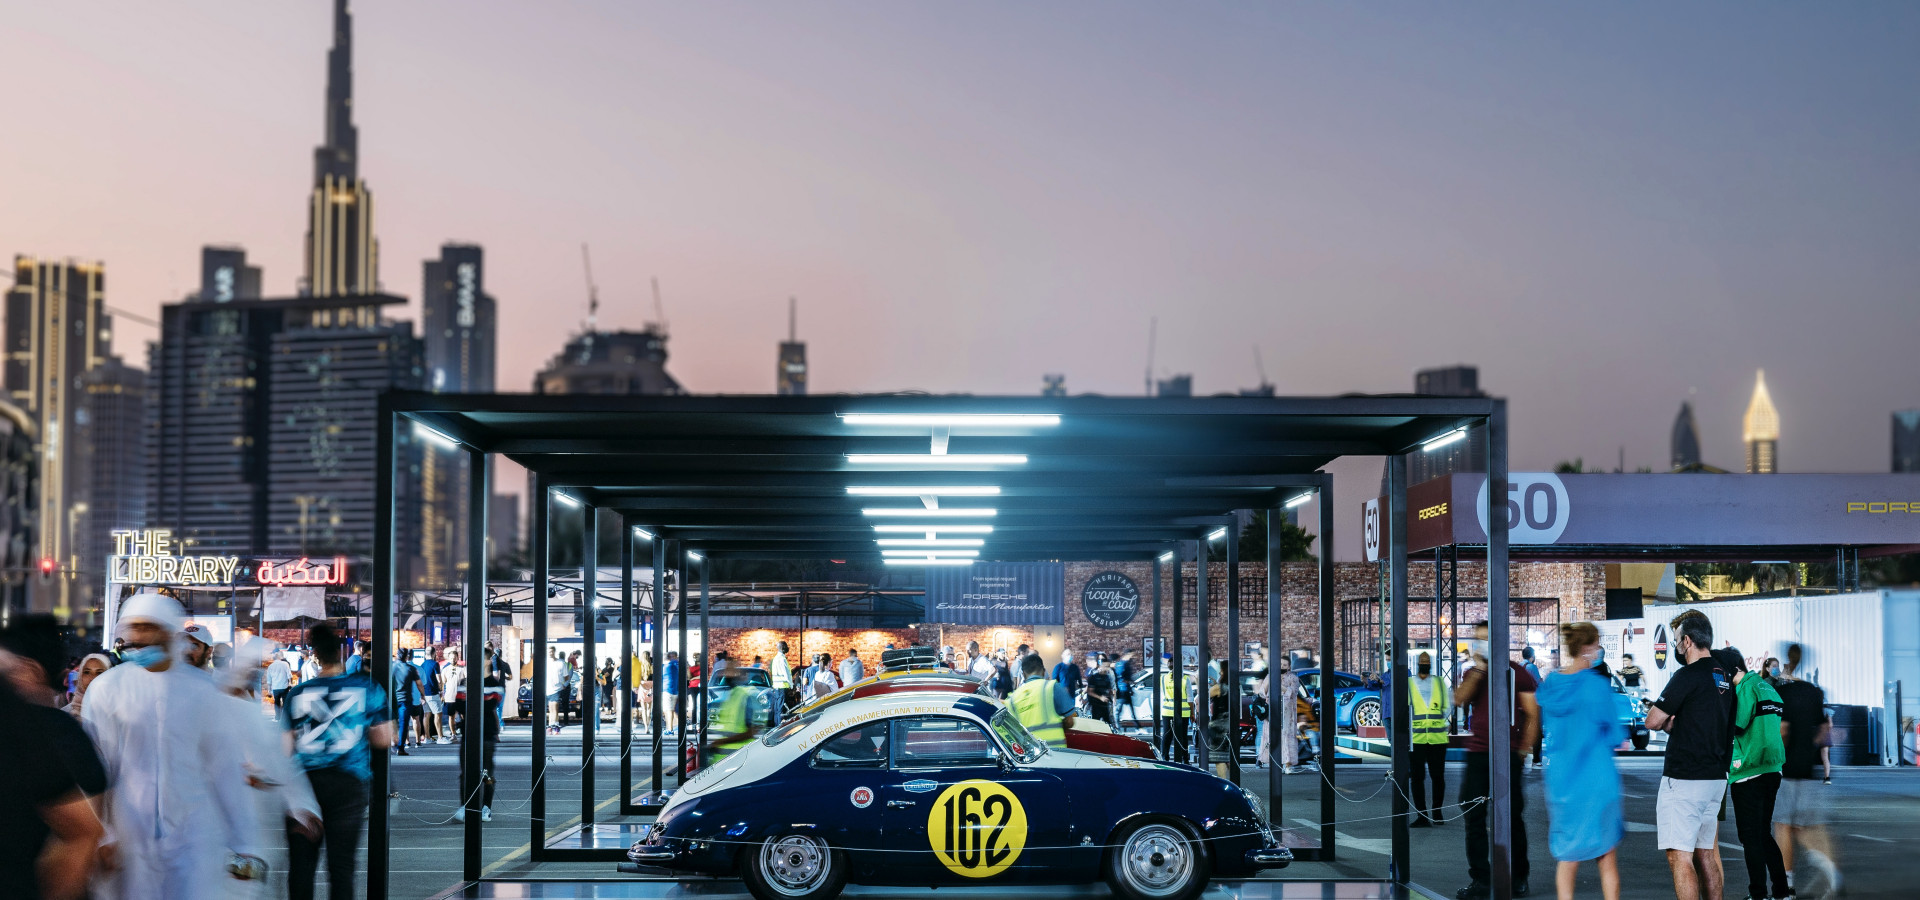 First ever “Icons of Porsche” festival attracts thousands of visitors